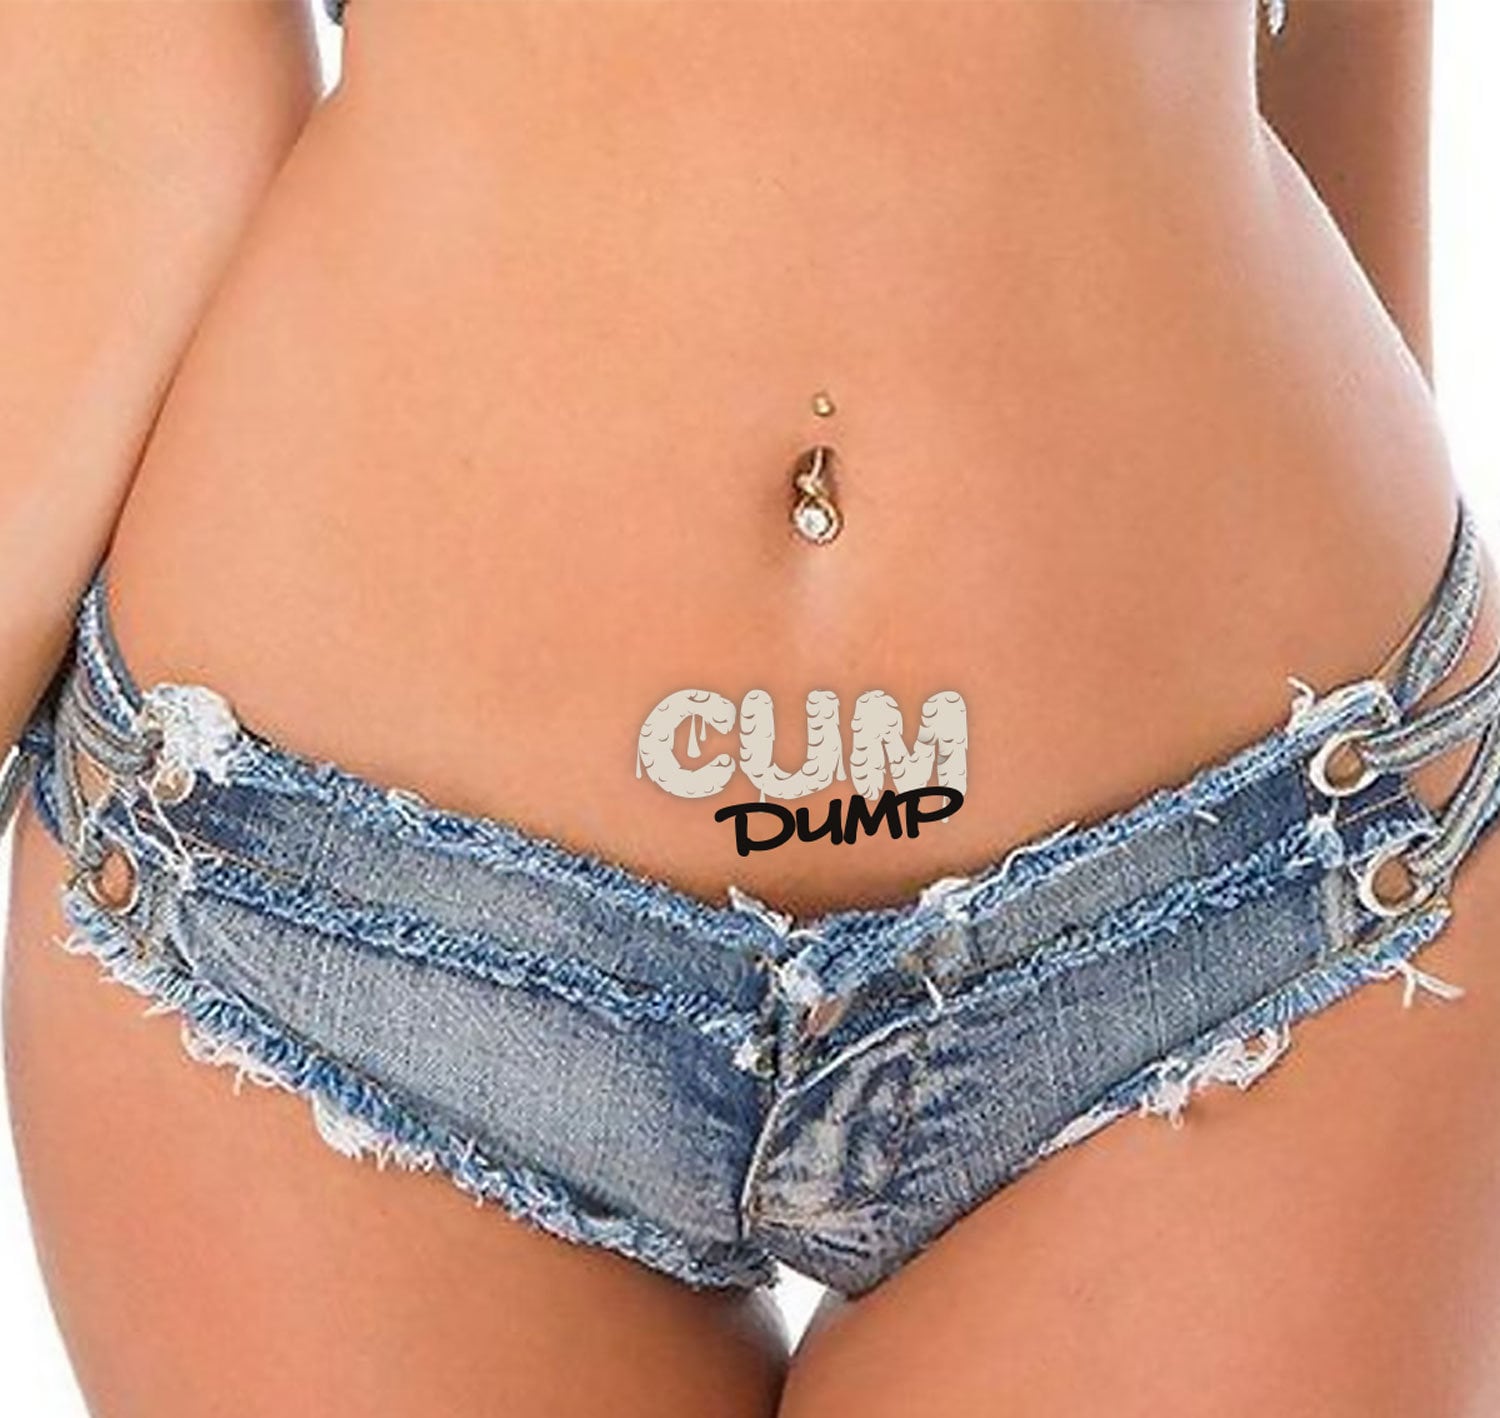 3x cum Adult Temporary Tattoos Tramp Stamps DDLG